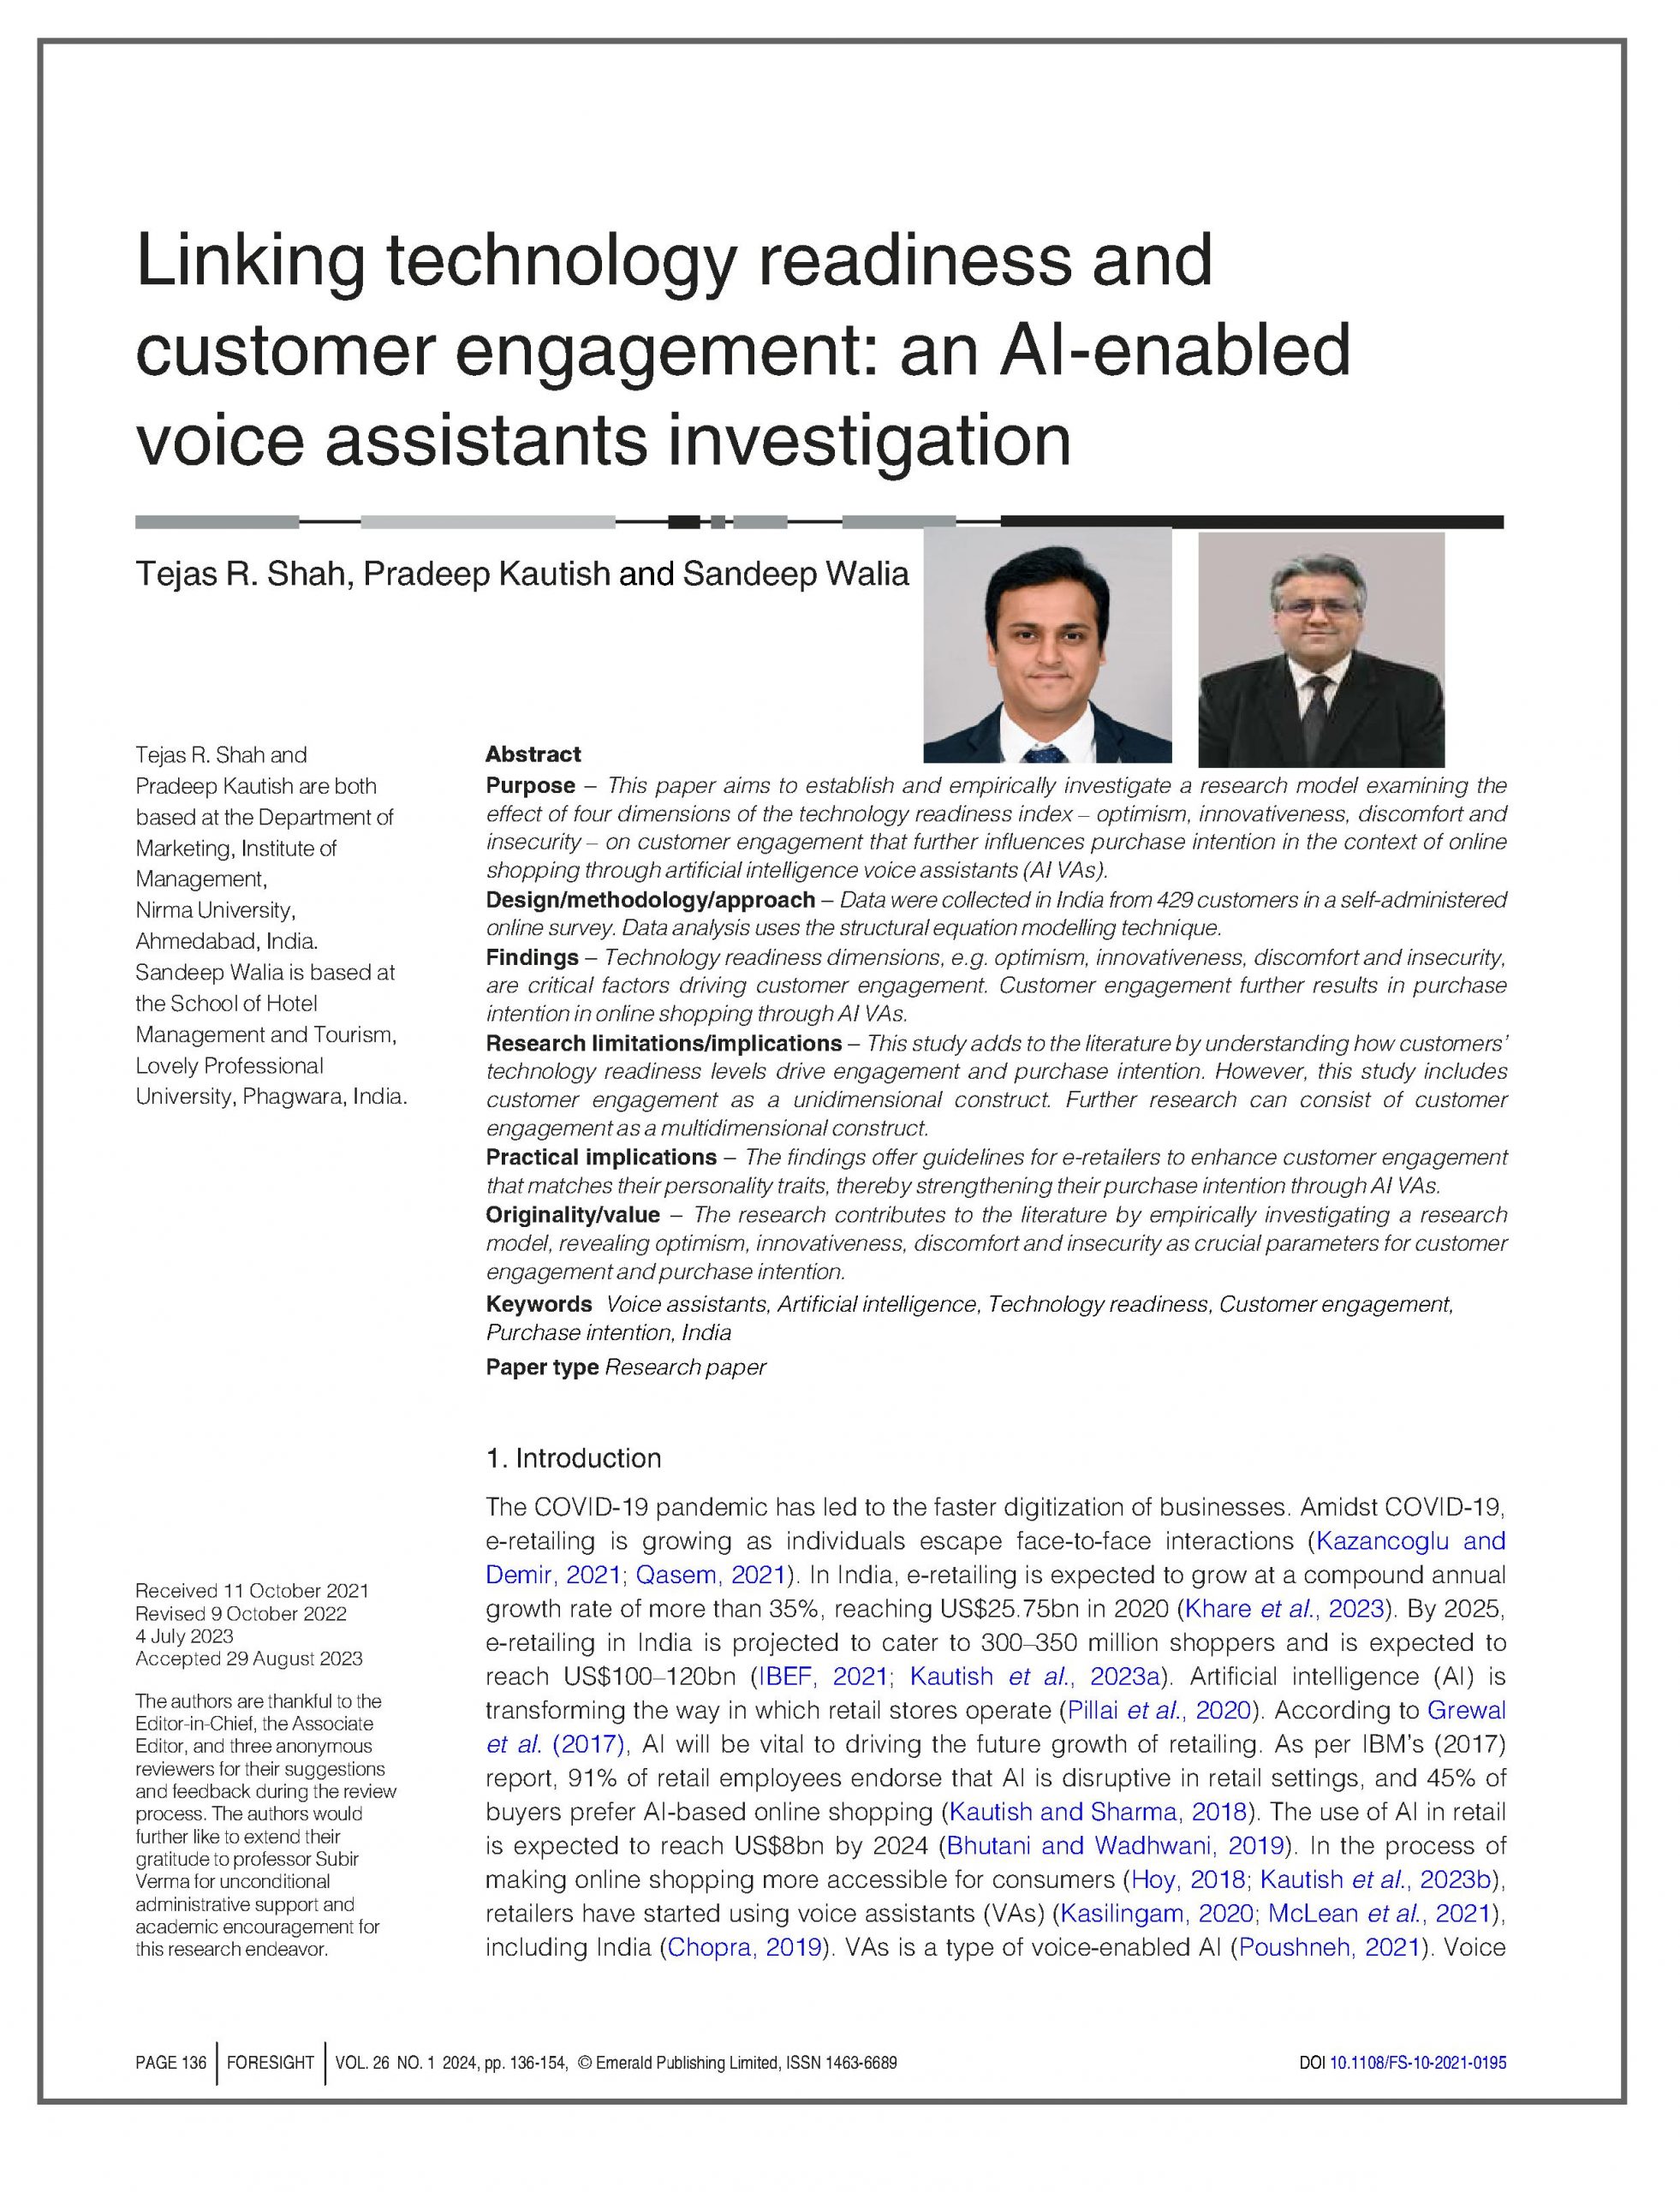 Linking technology readiness and customer engagement: an AI-enabled Voice assistant’s investigation